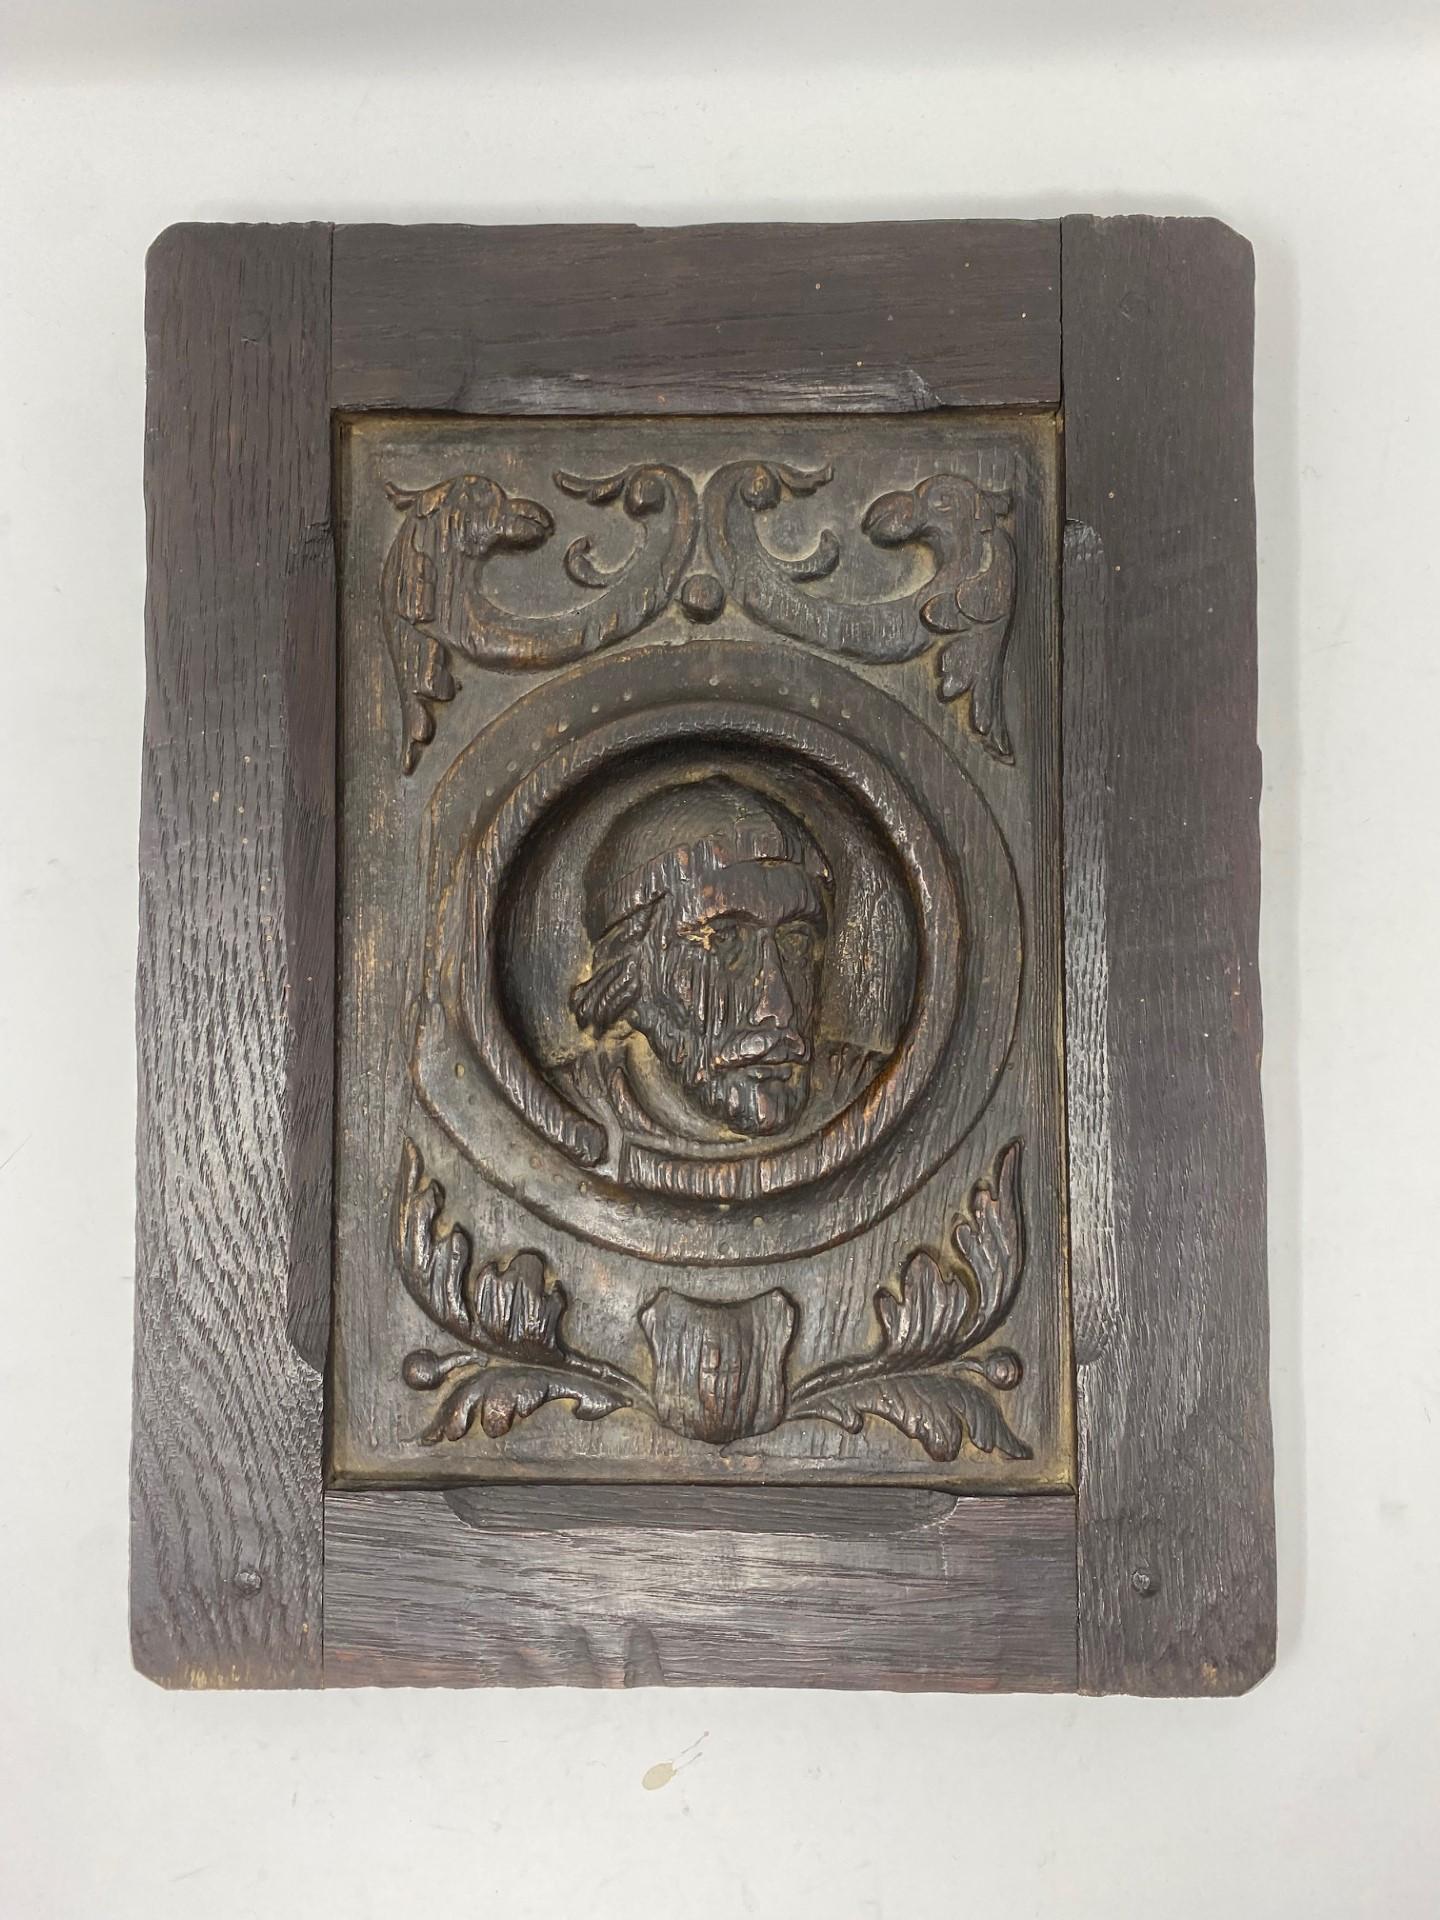 Beautiful vintage wood and ceramic art panel in the style of a classical religious art carving.  The terracota figurative panel shows the head of a male figure that resembles a clergyman that is centered by baroque style details.  The panel itself